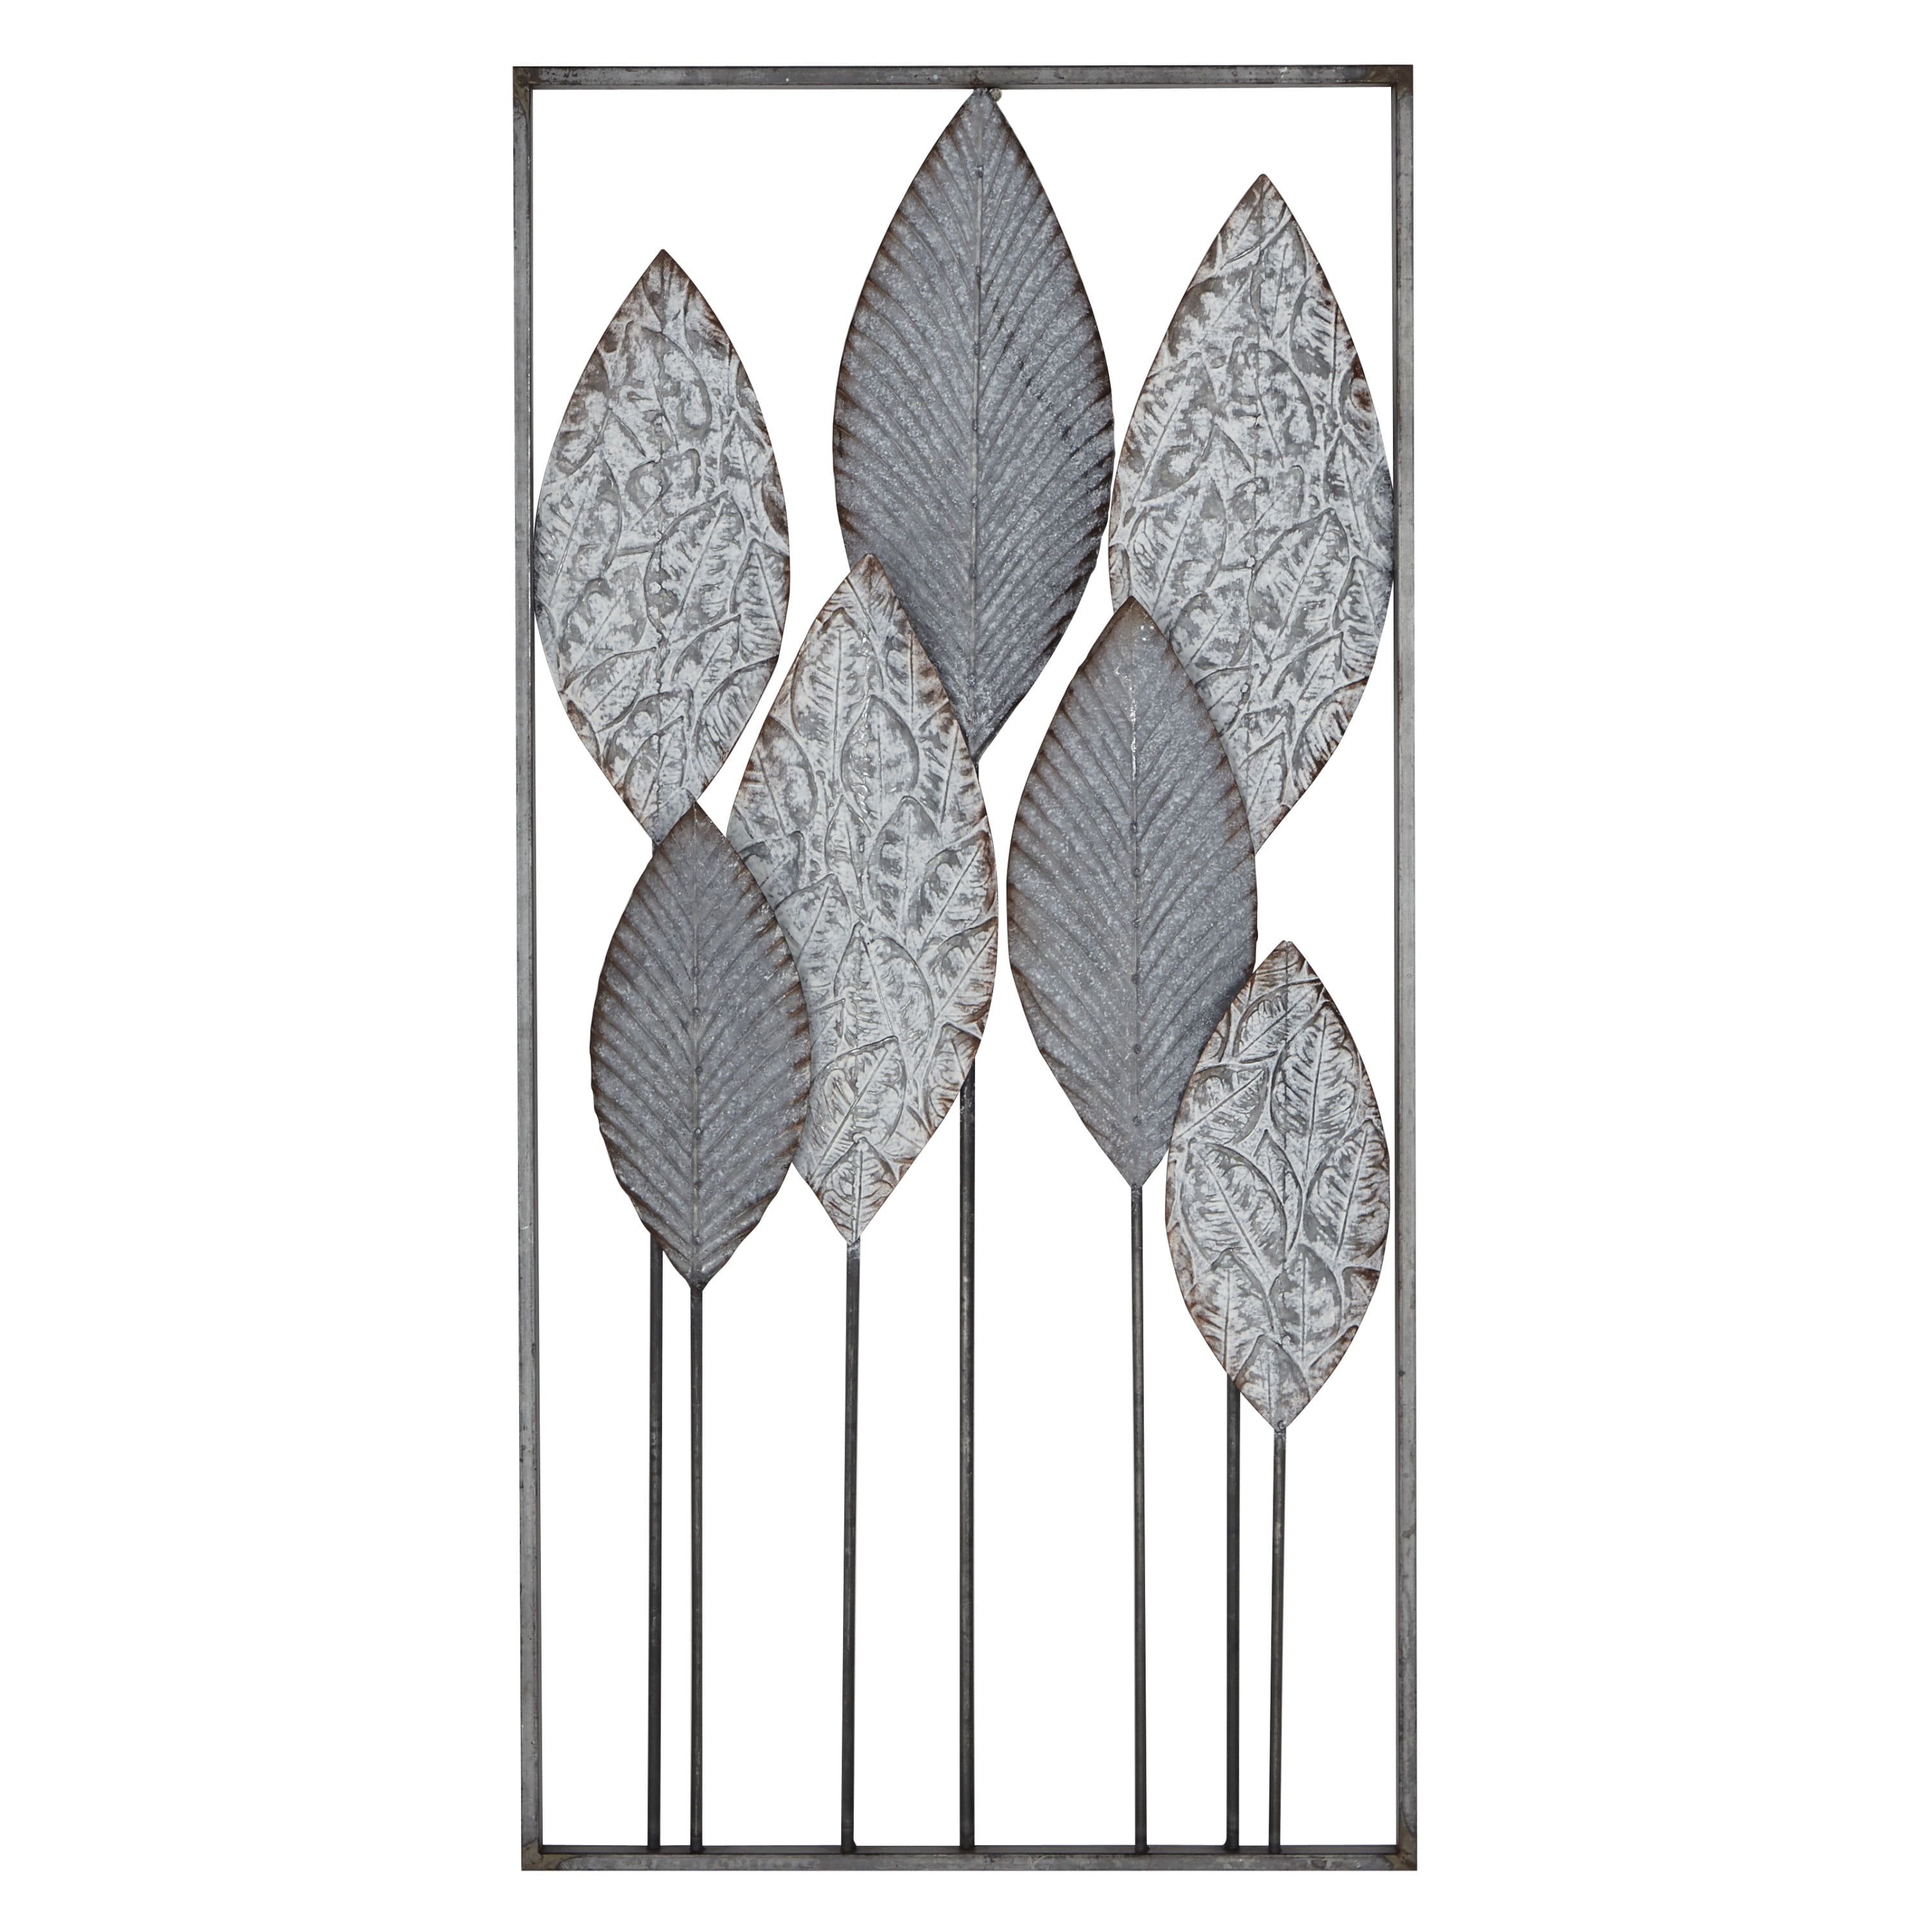 Decmode Gray Metal Tall Cut Out Leaf Wall Decor With Intricate Laser Cut  Designs – Walmart Pertaining To Tall Cut Out Leaf Wall Art (View 6 of 15)